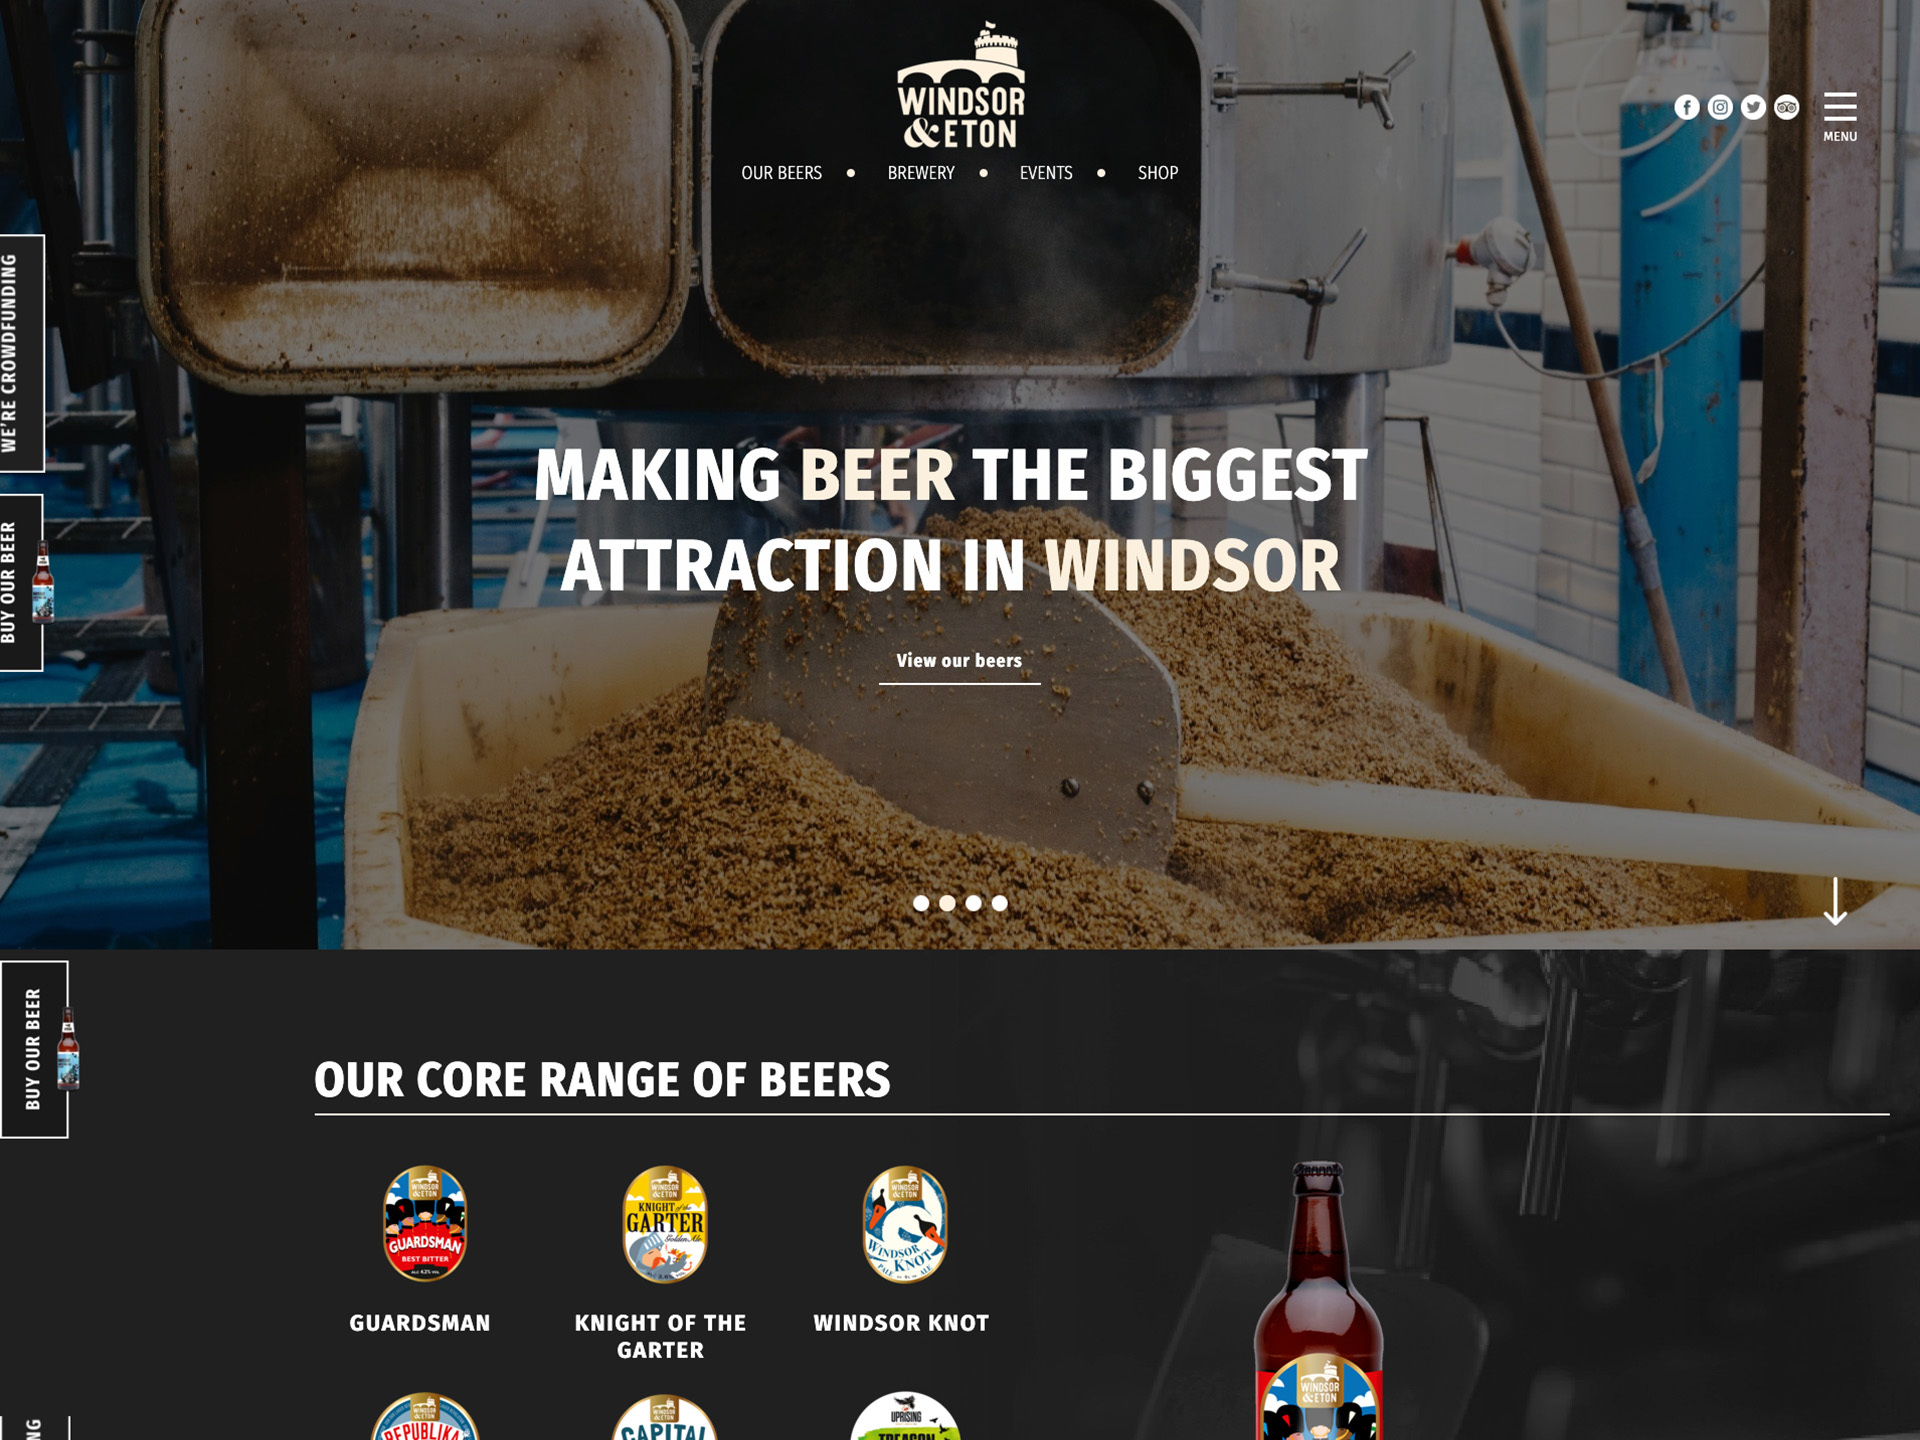 A website for a company who make beer